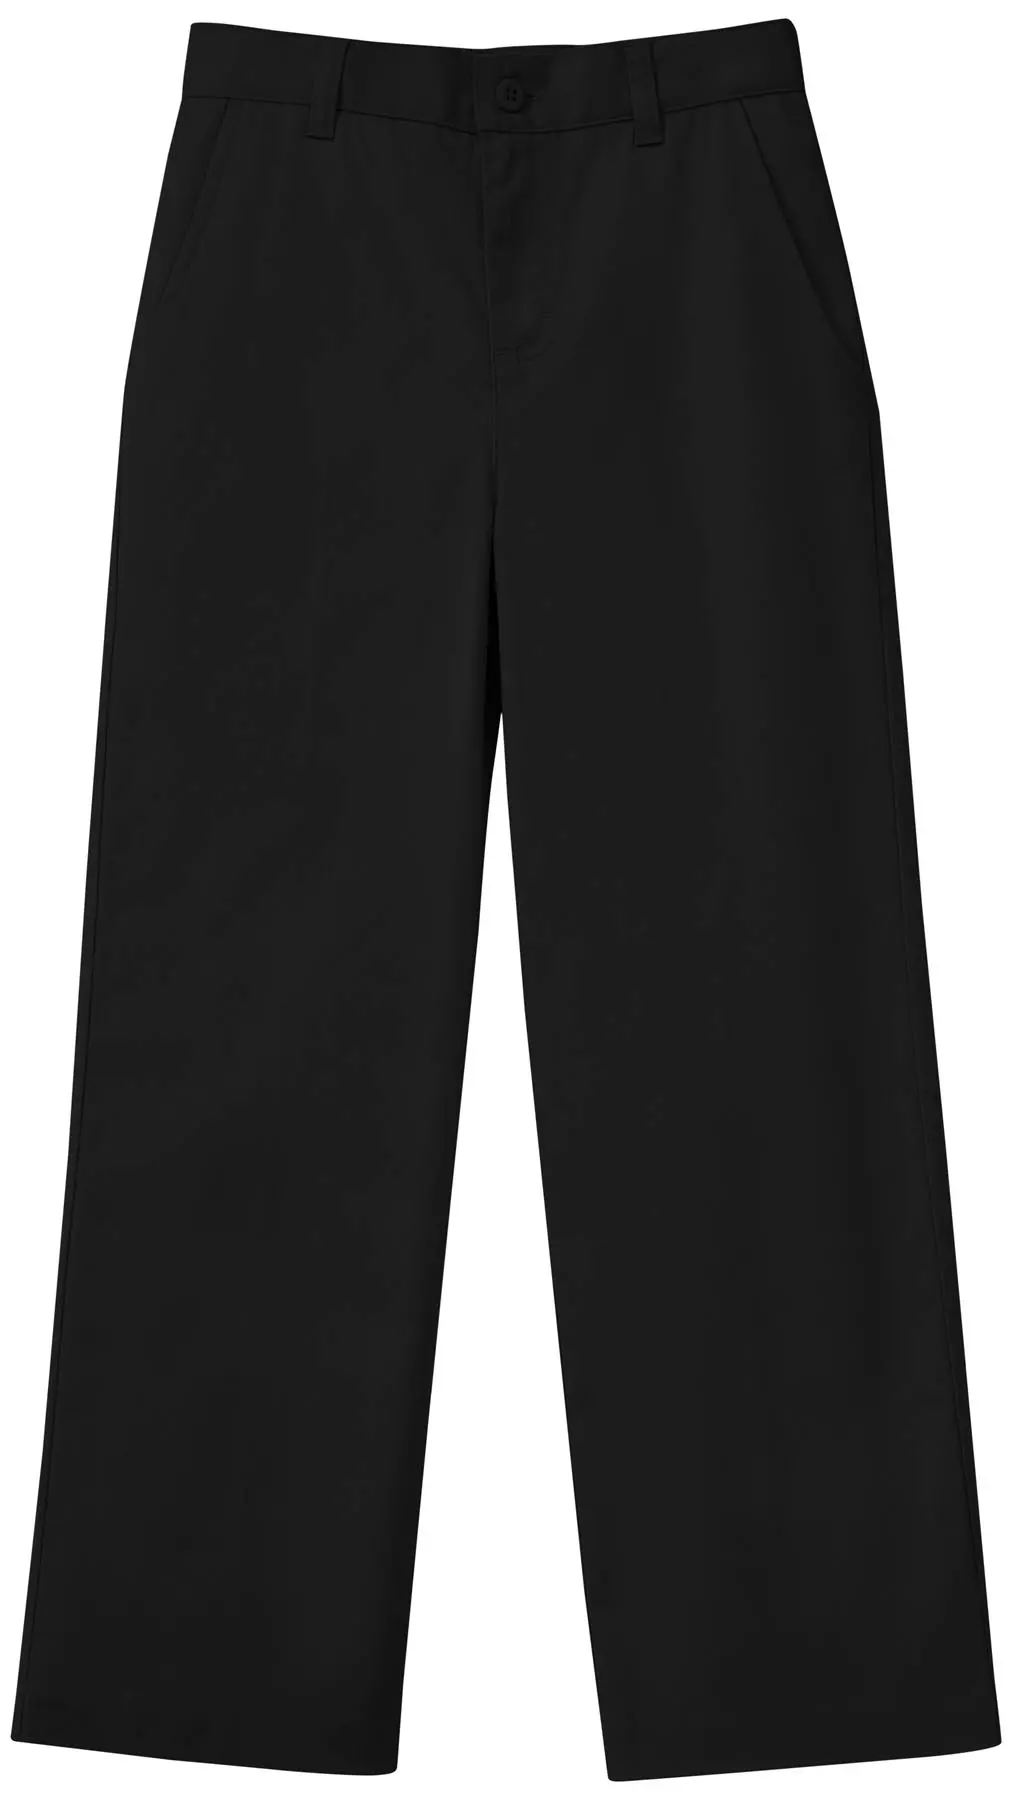 Girls Stretch Flat Front Pant